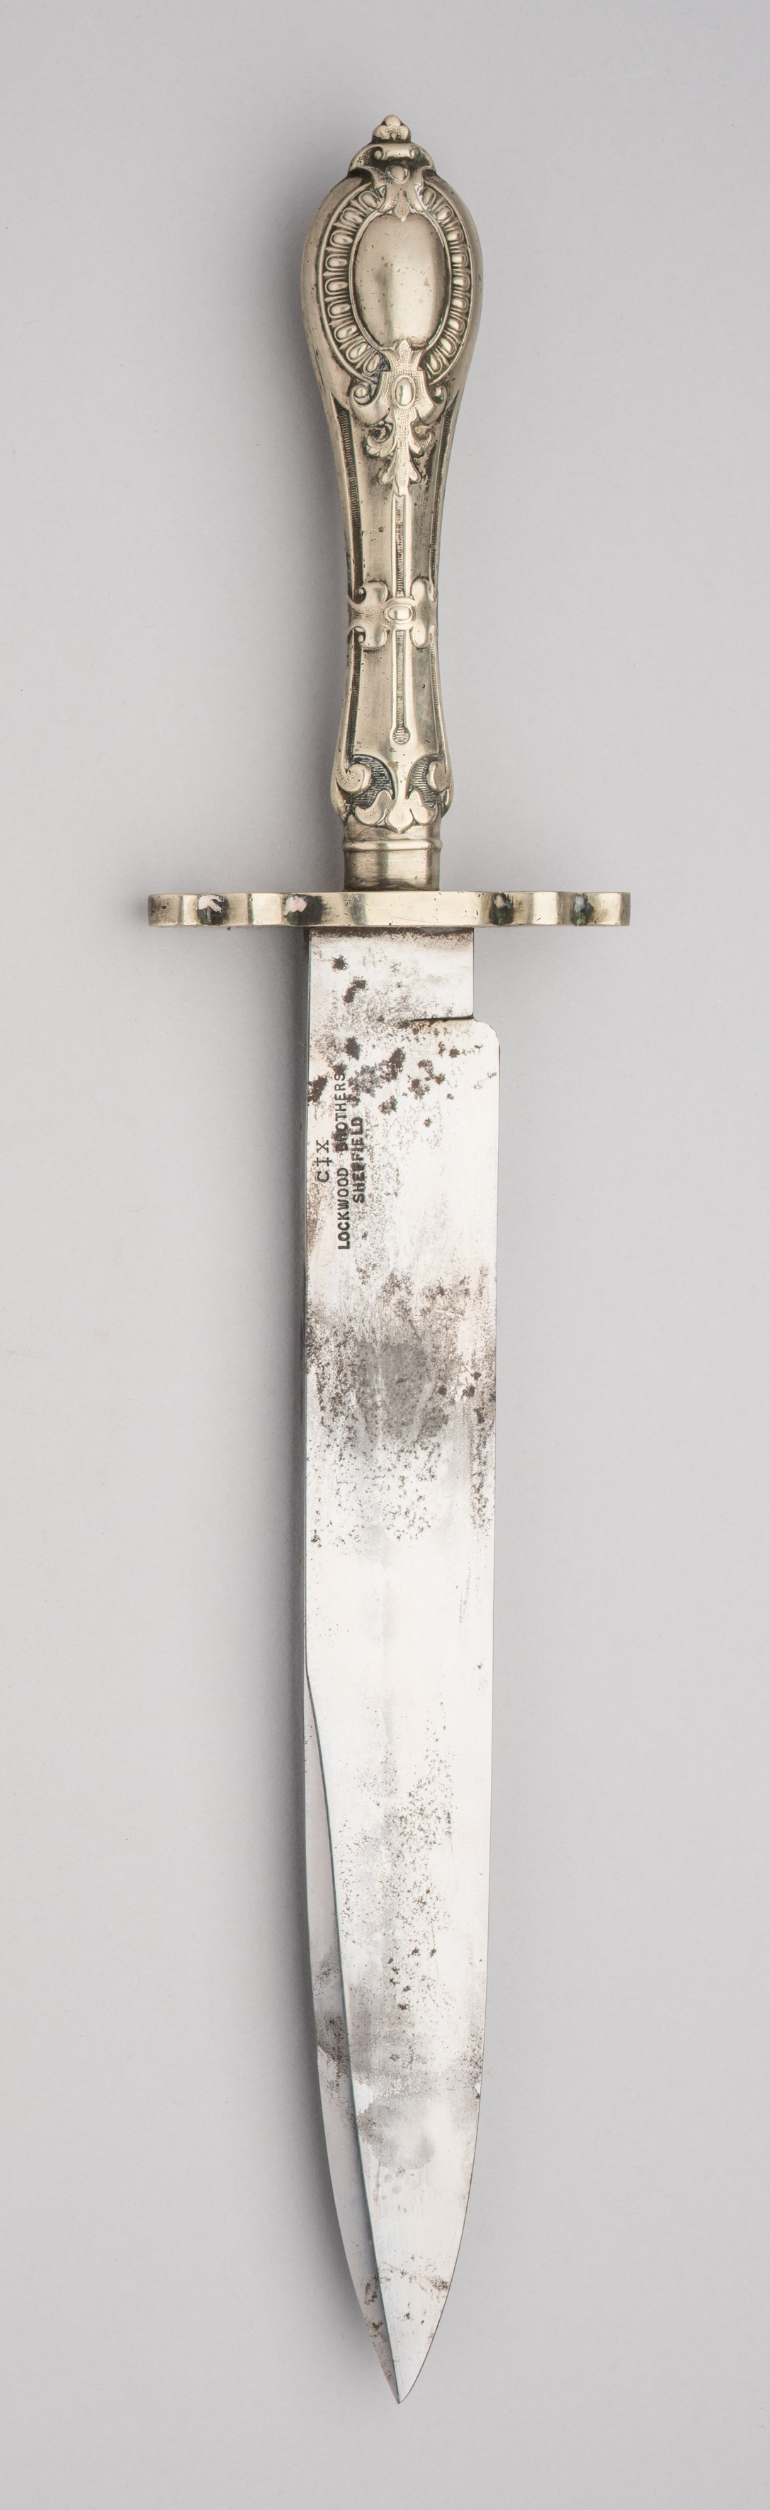 A BOWIE KNIFE, LOCKWOOD BROTHERS, SHEFFIELD, LATE 19TH/20TH CENTURY